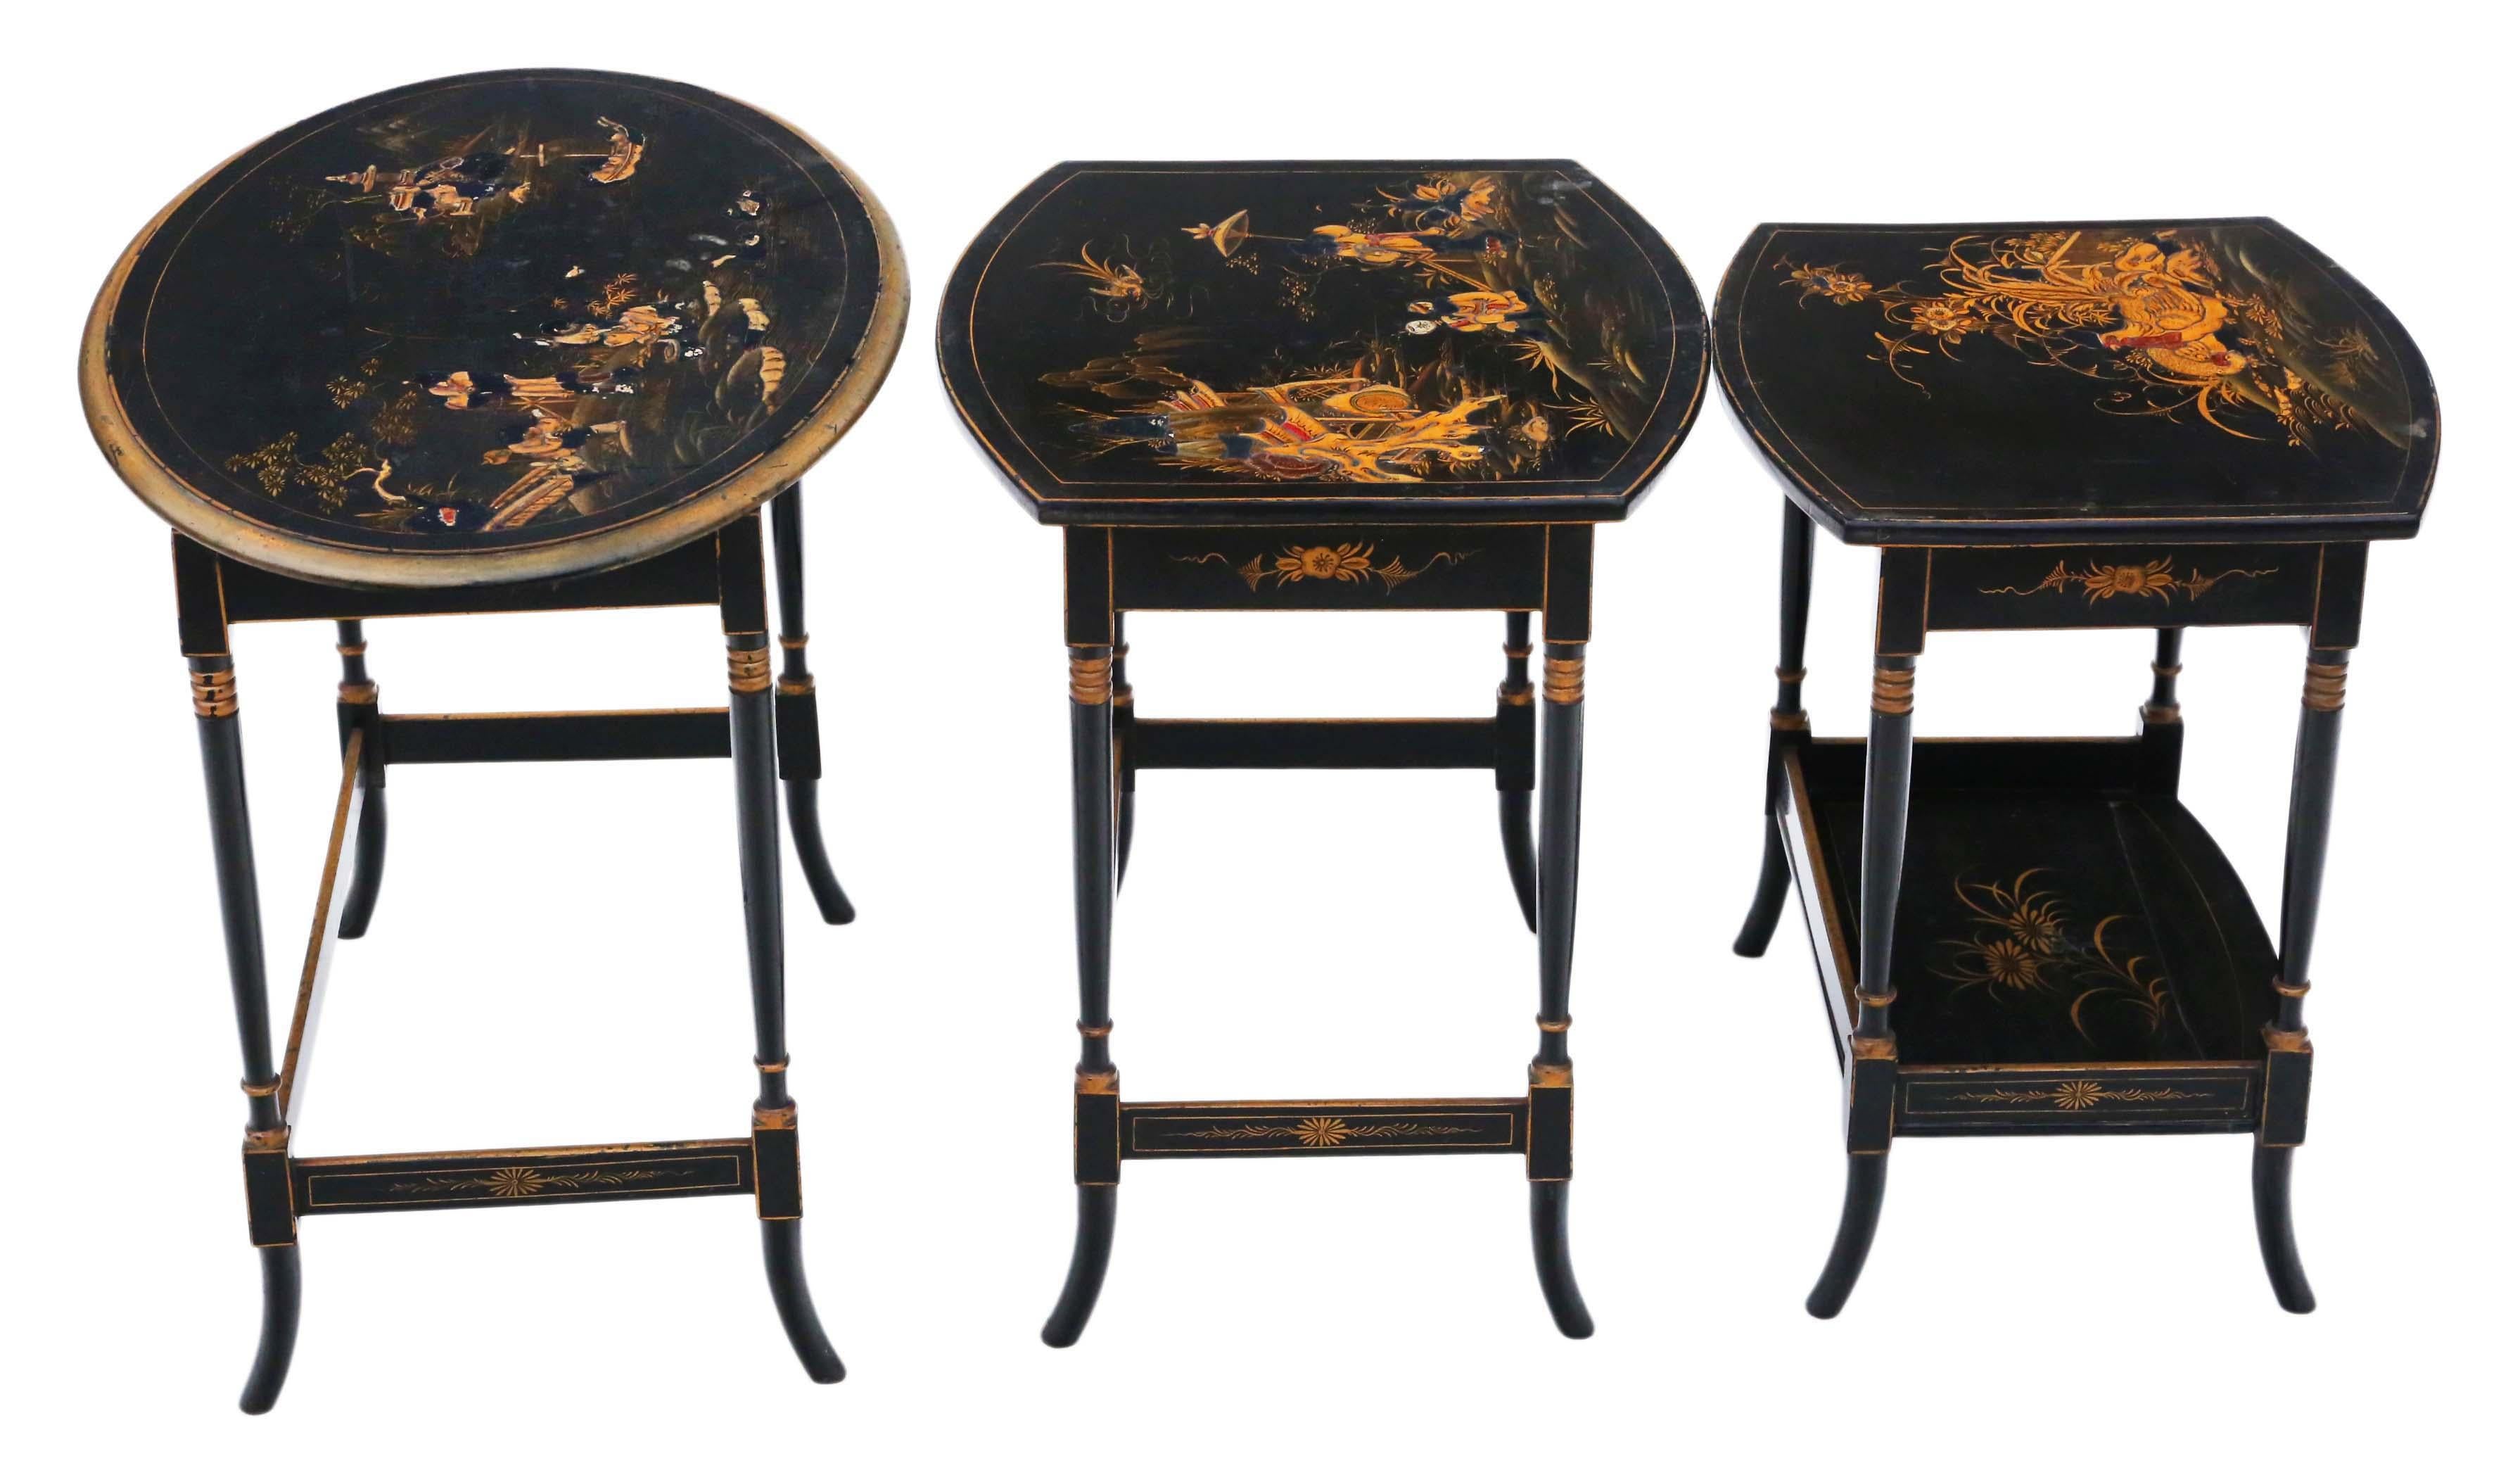 Wood Antique Victorian Oriental Chinoiserie Nest of Decorated Black Lacquer Tables